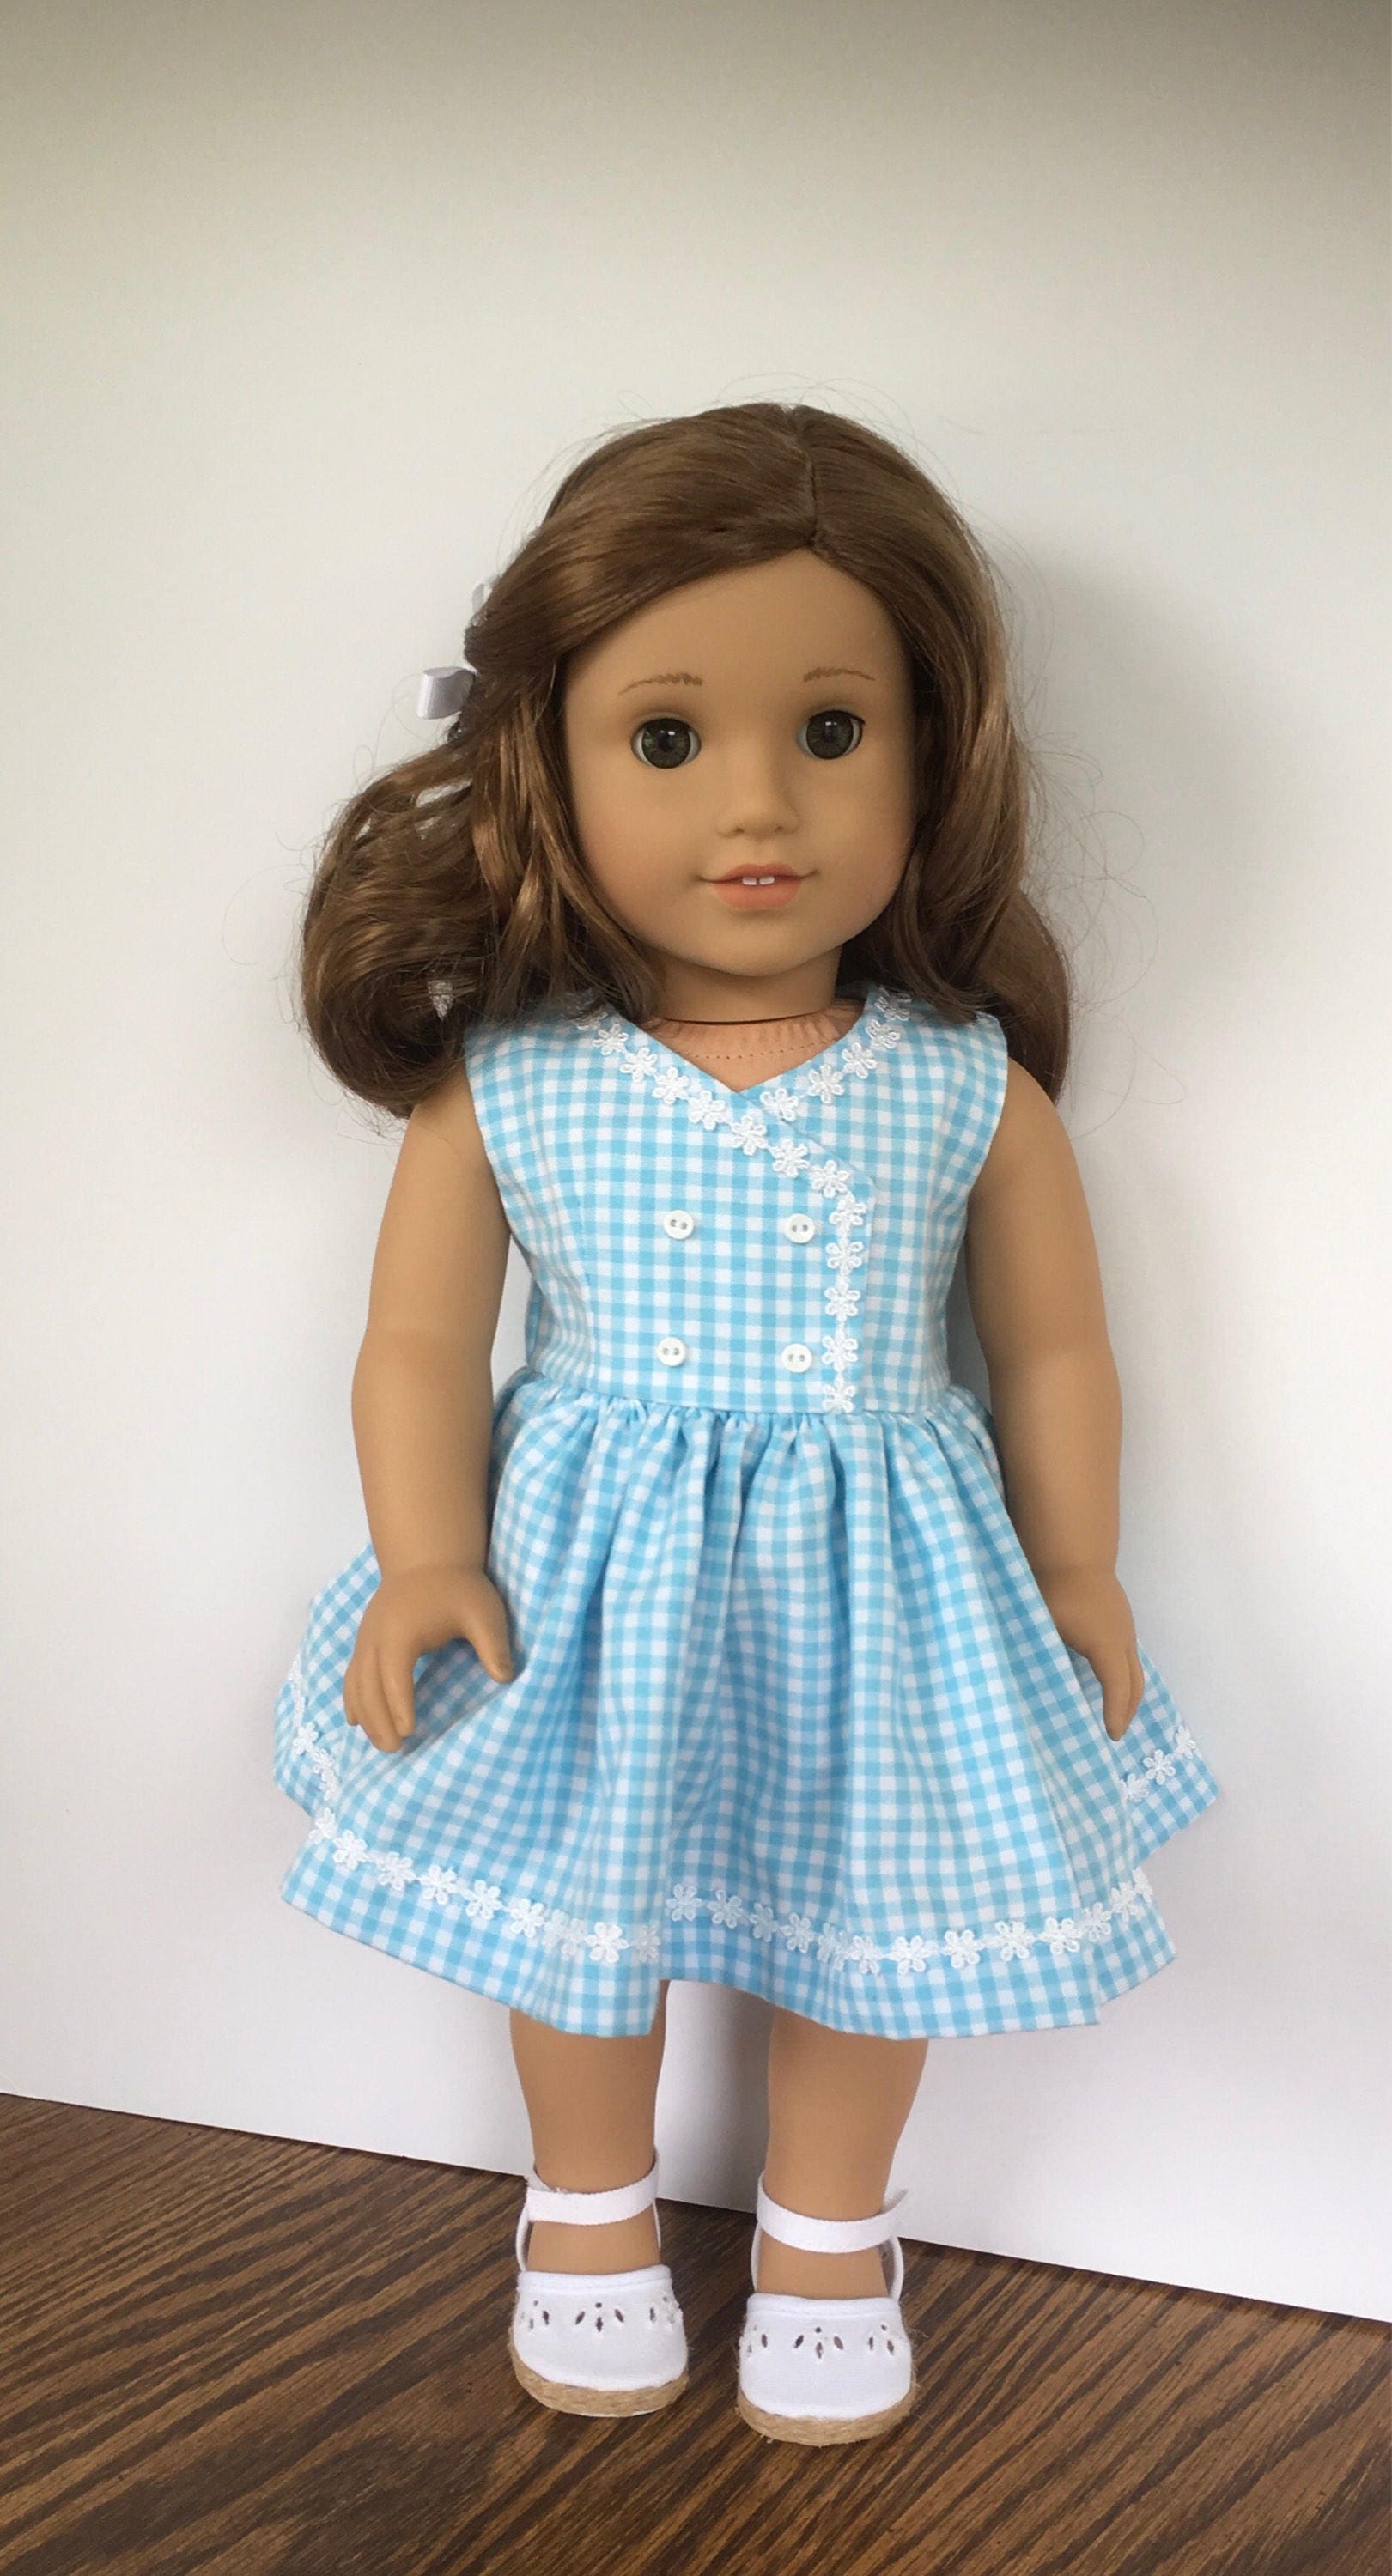 18 doll blue and white gingham dress with white daisy